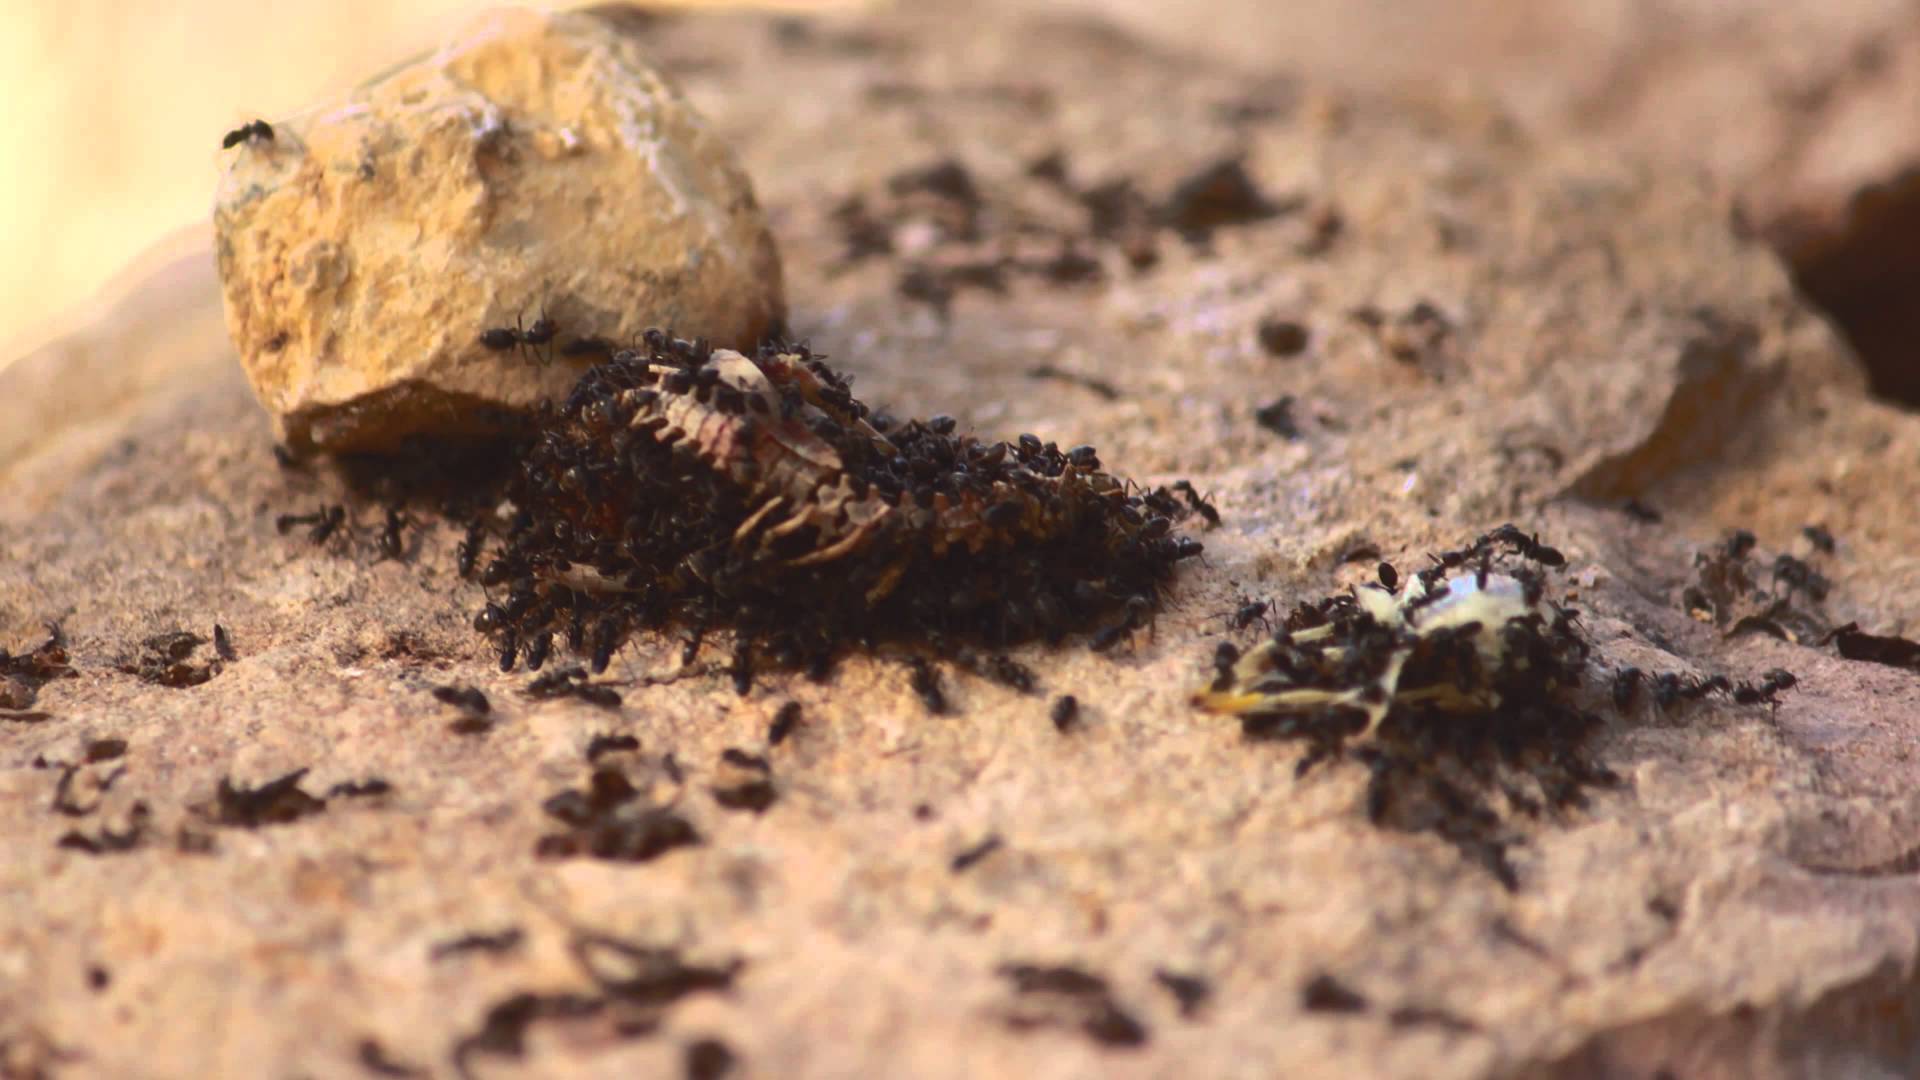 Incredible 4k time lapse featuring feasting ants - YouTube